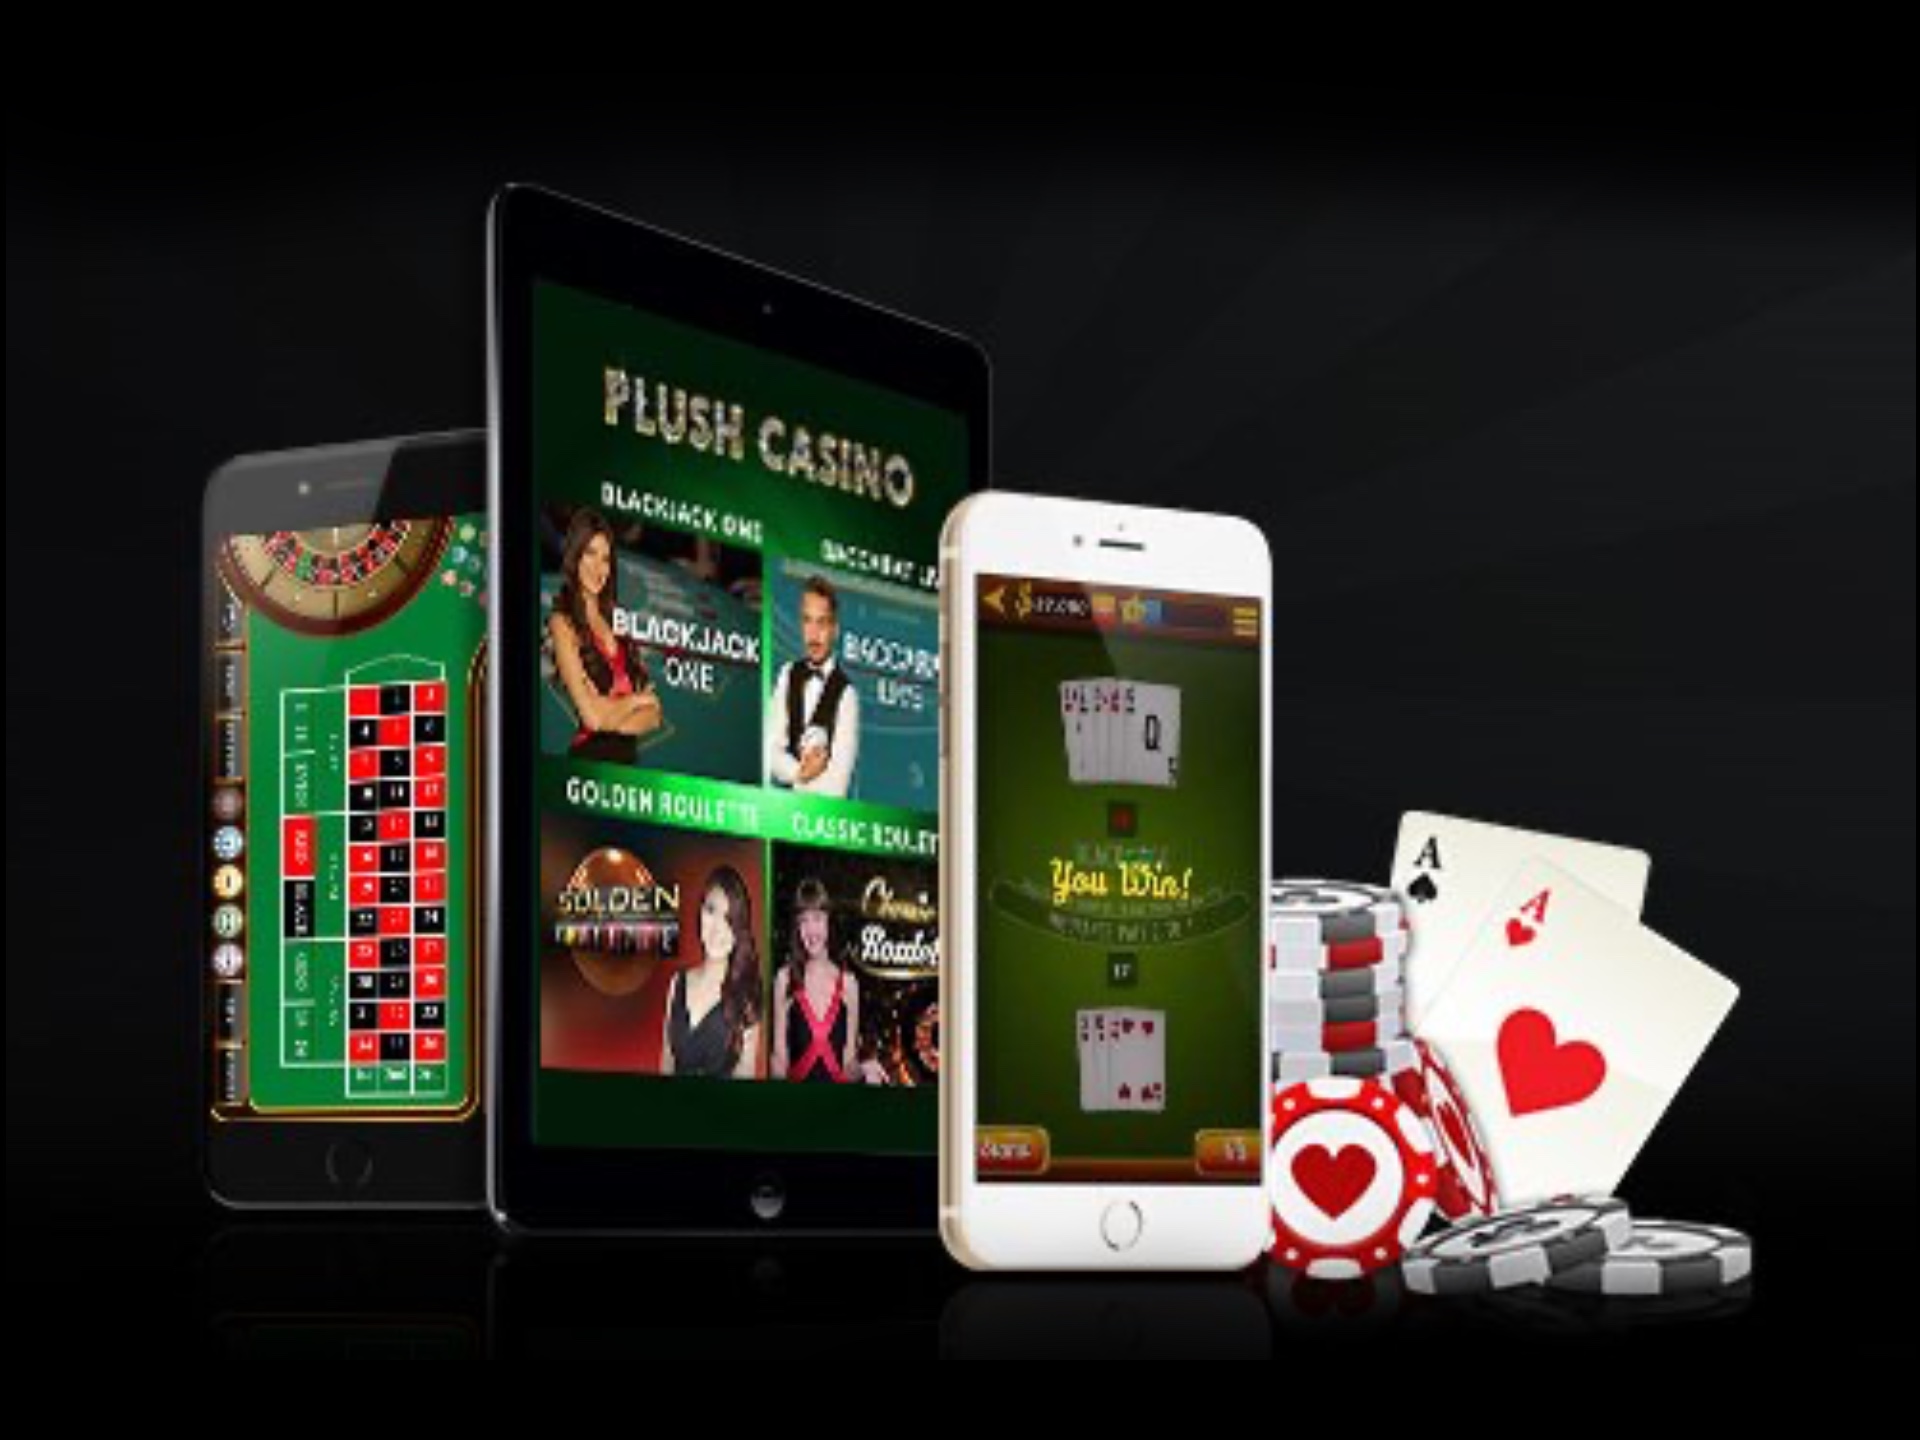 Check all of these featires before choosing a mobile casino to play.